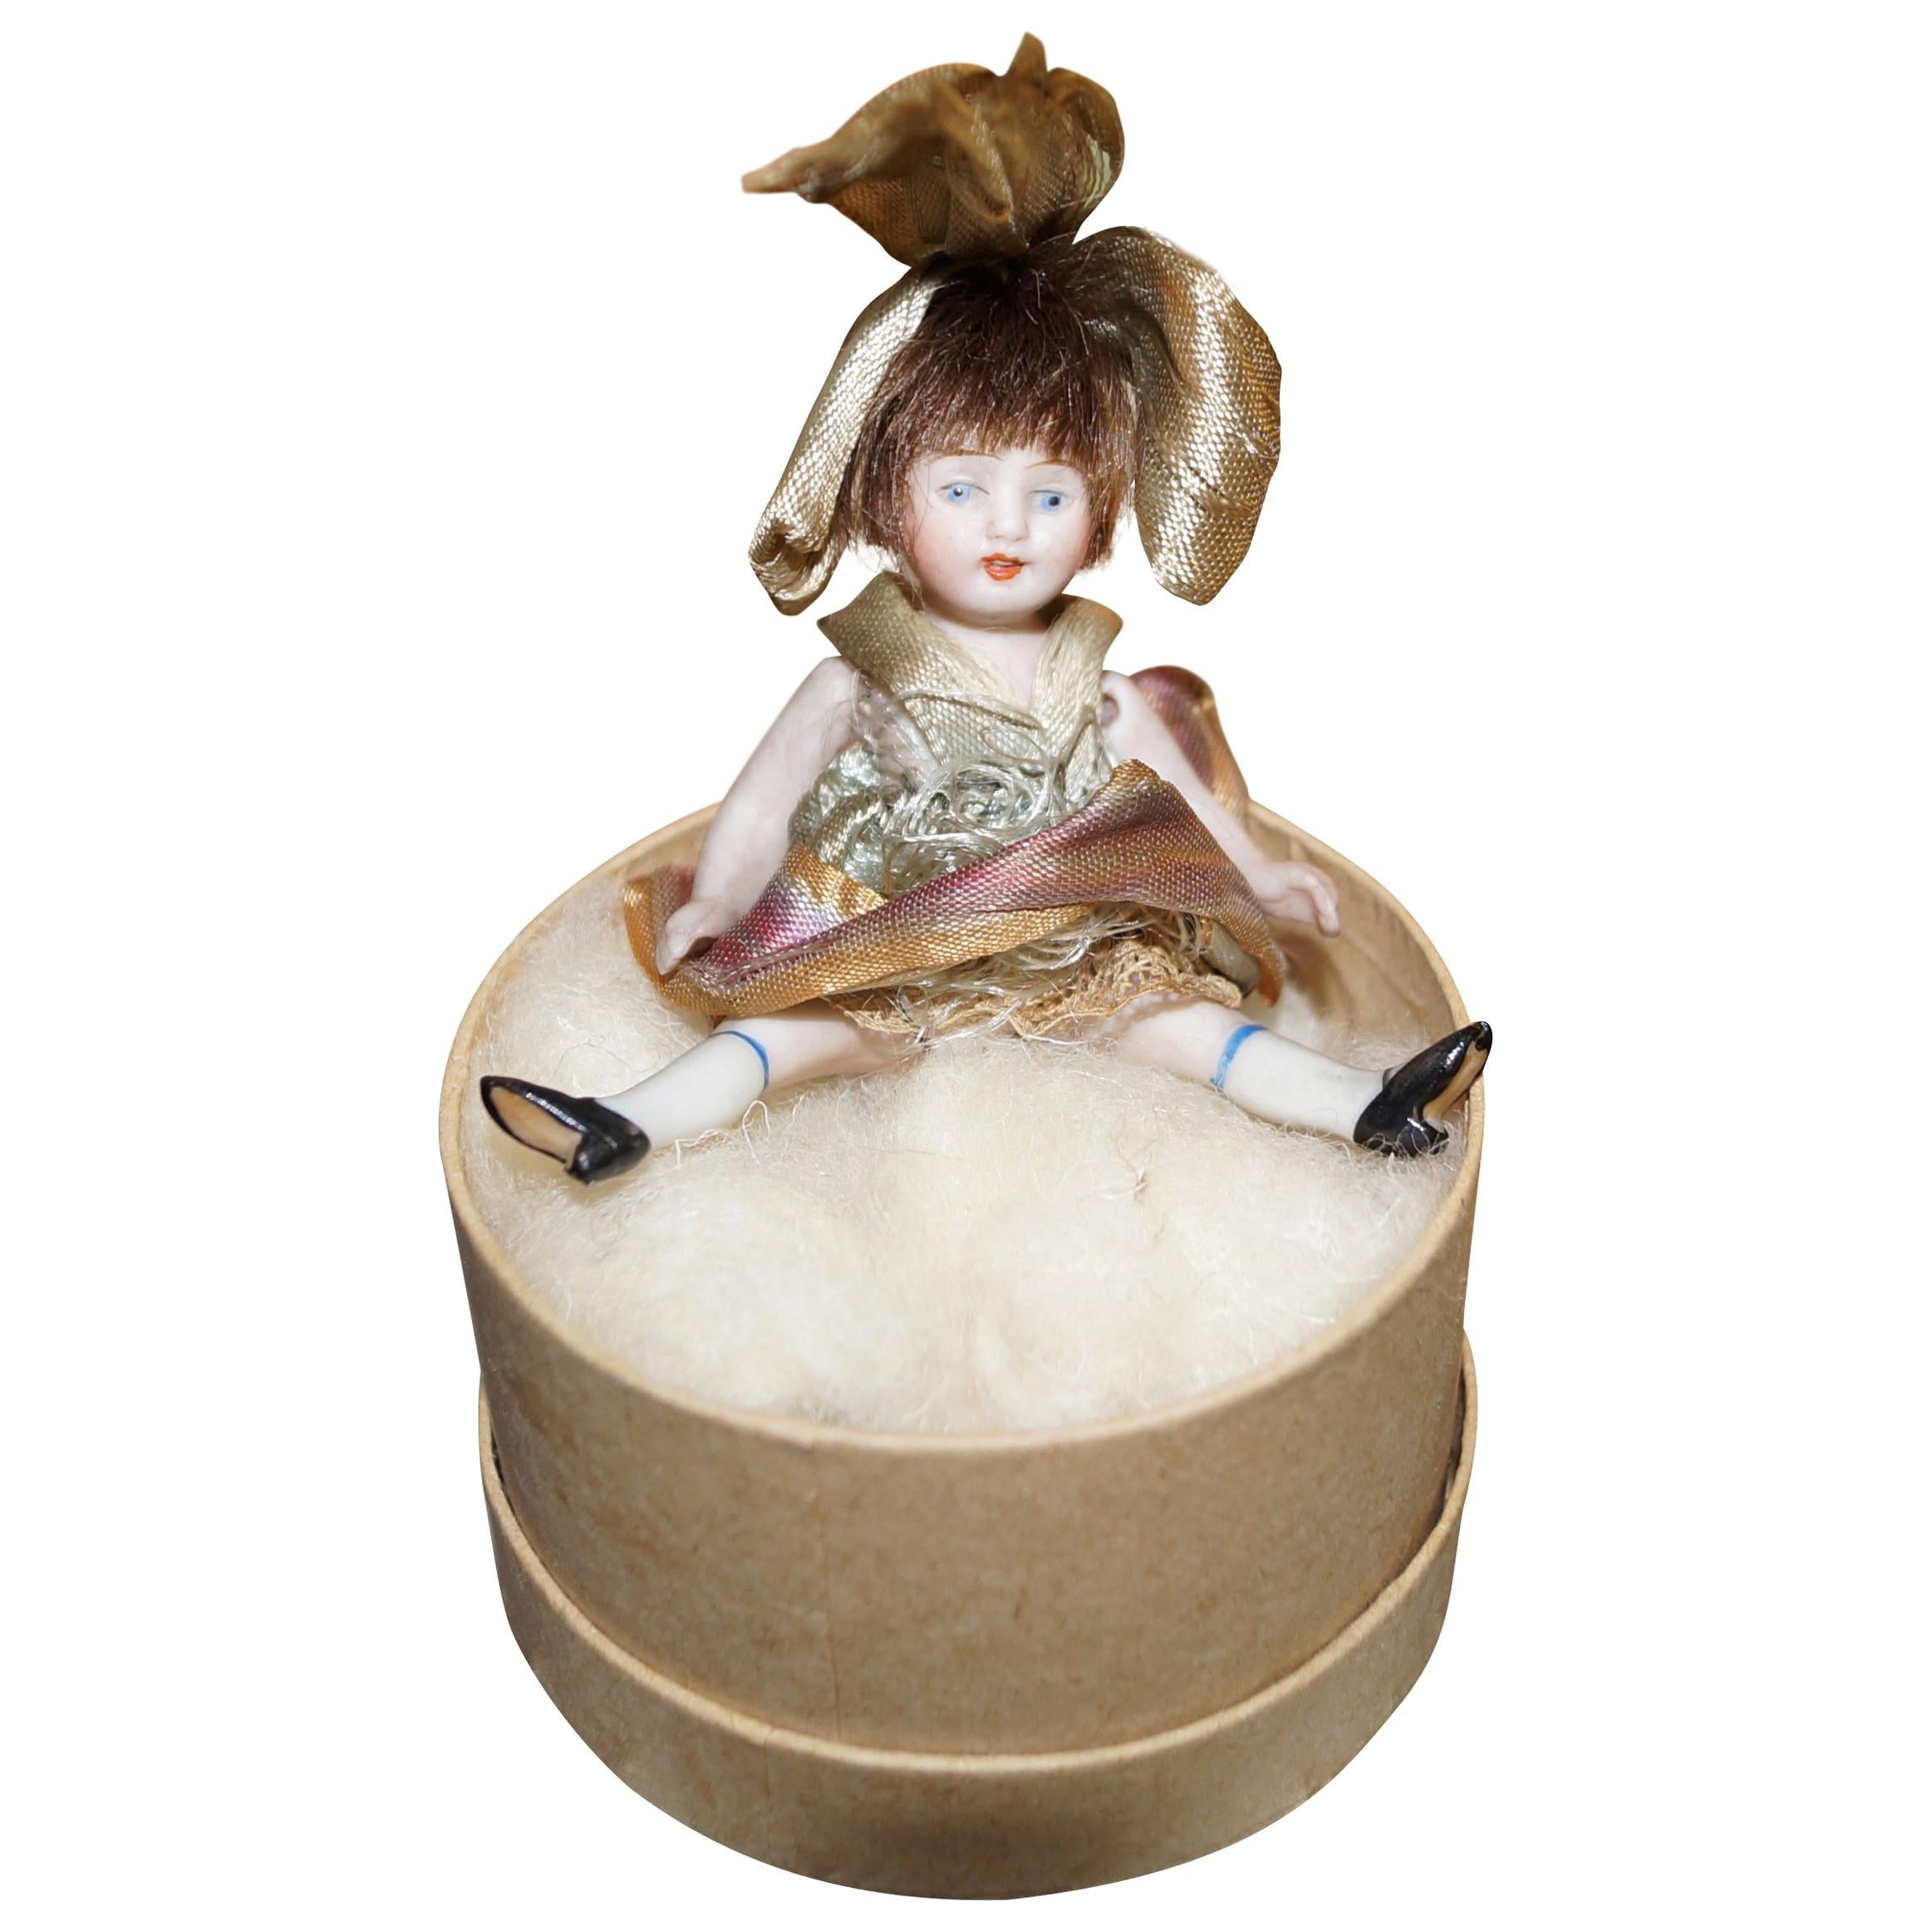 Precious Porcelain Biscuit Doll, circa 1930 For Sale